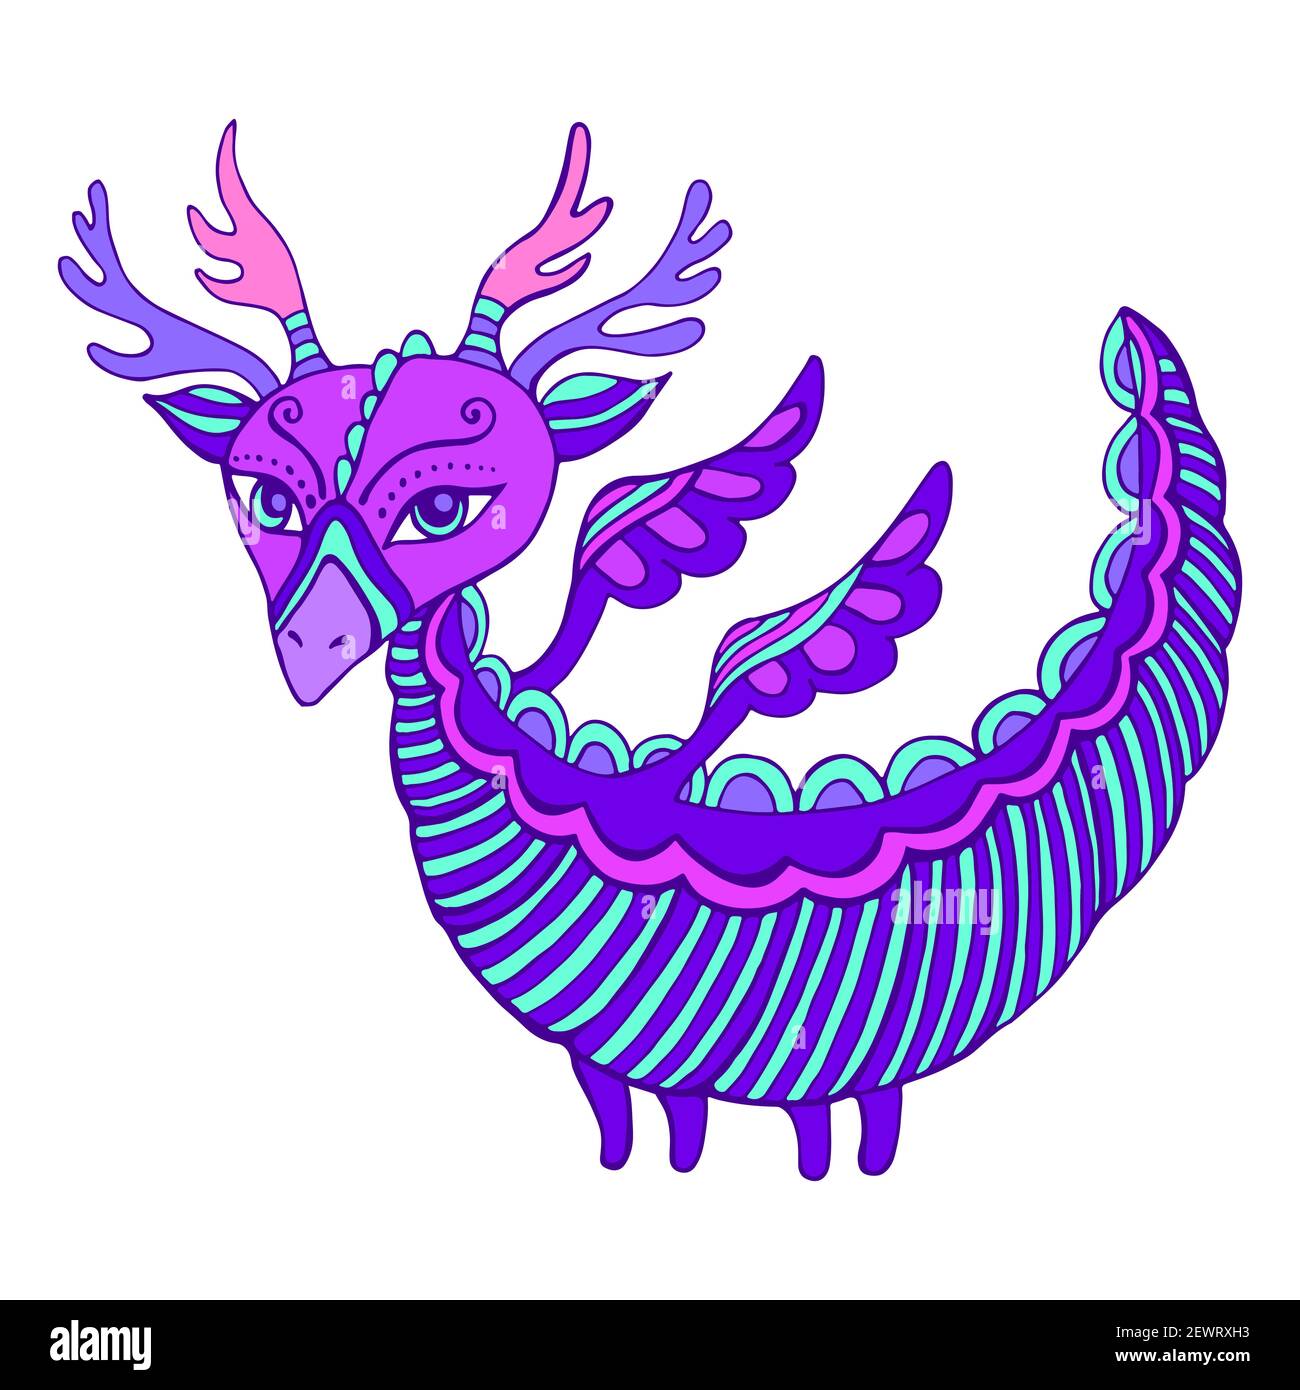 Amazing cute colorful Dragon with wings, horns and tails. Stock Vector